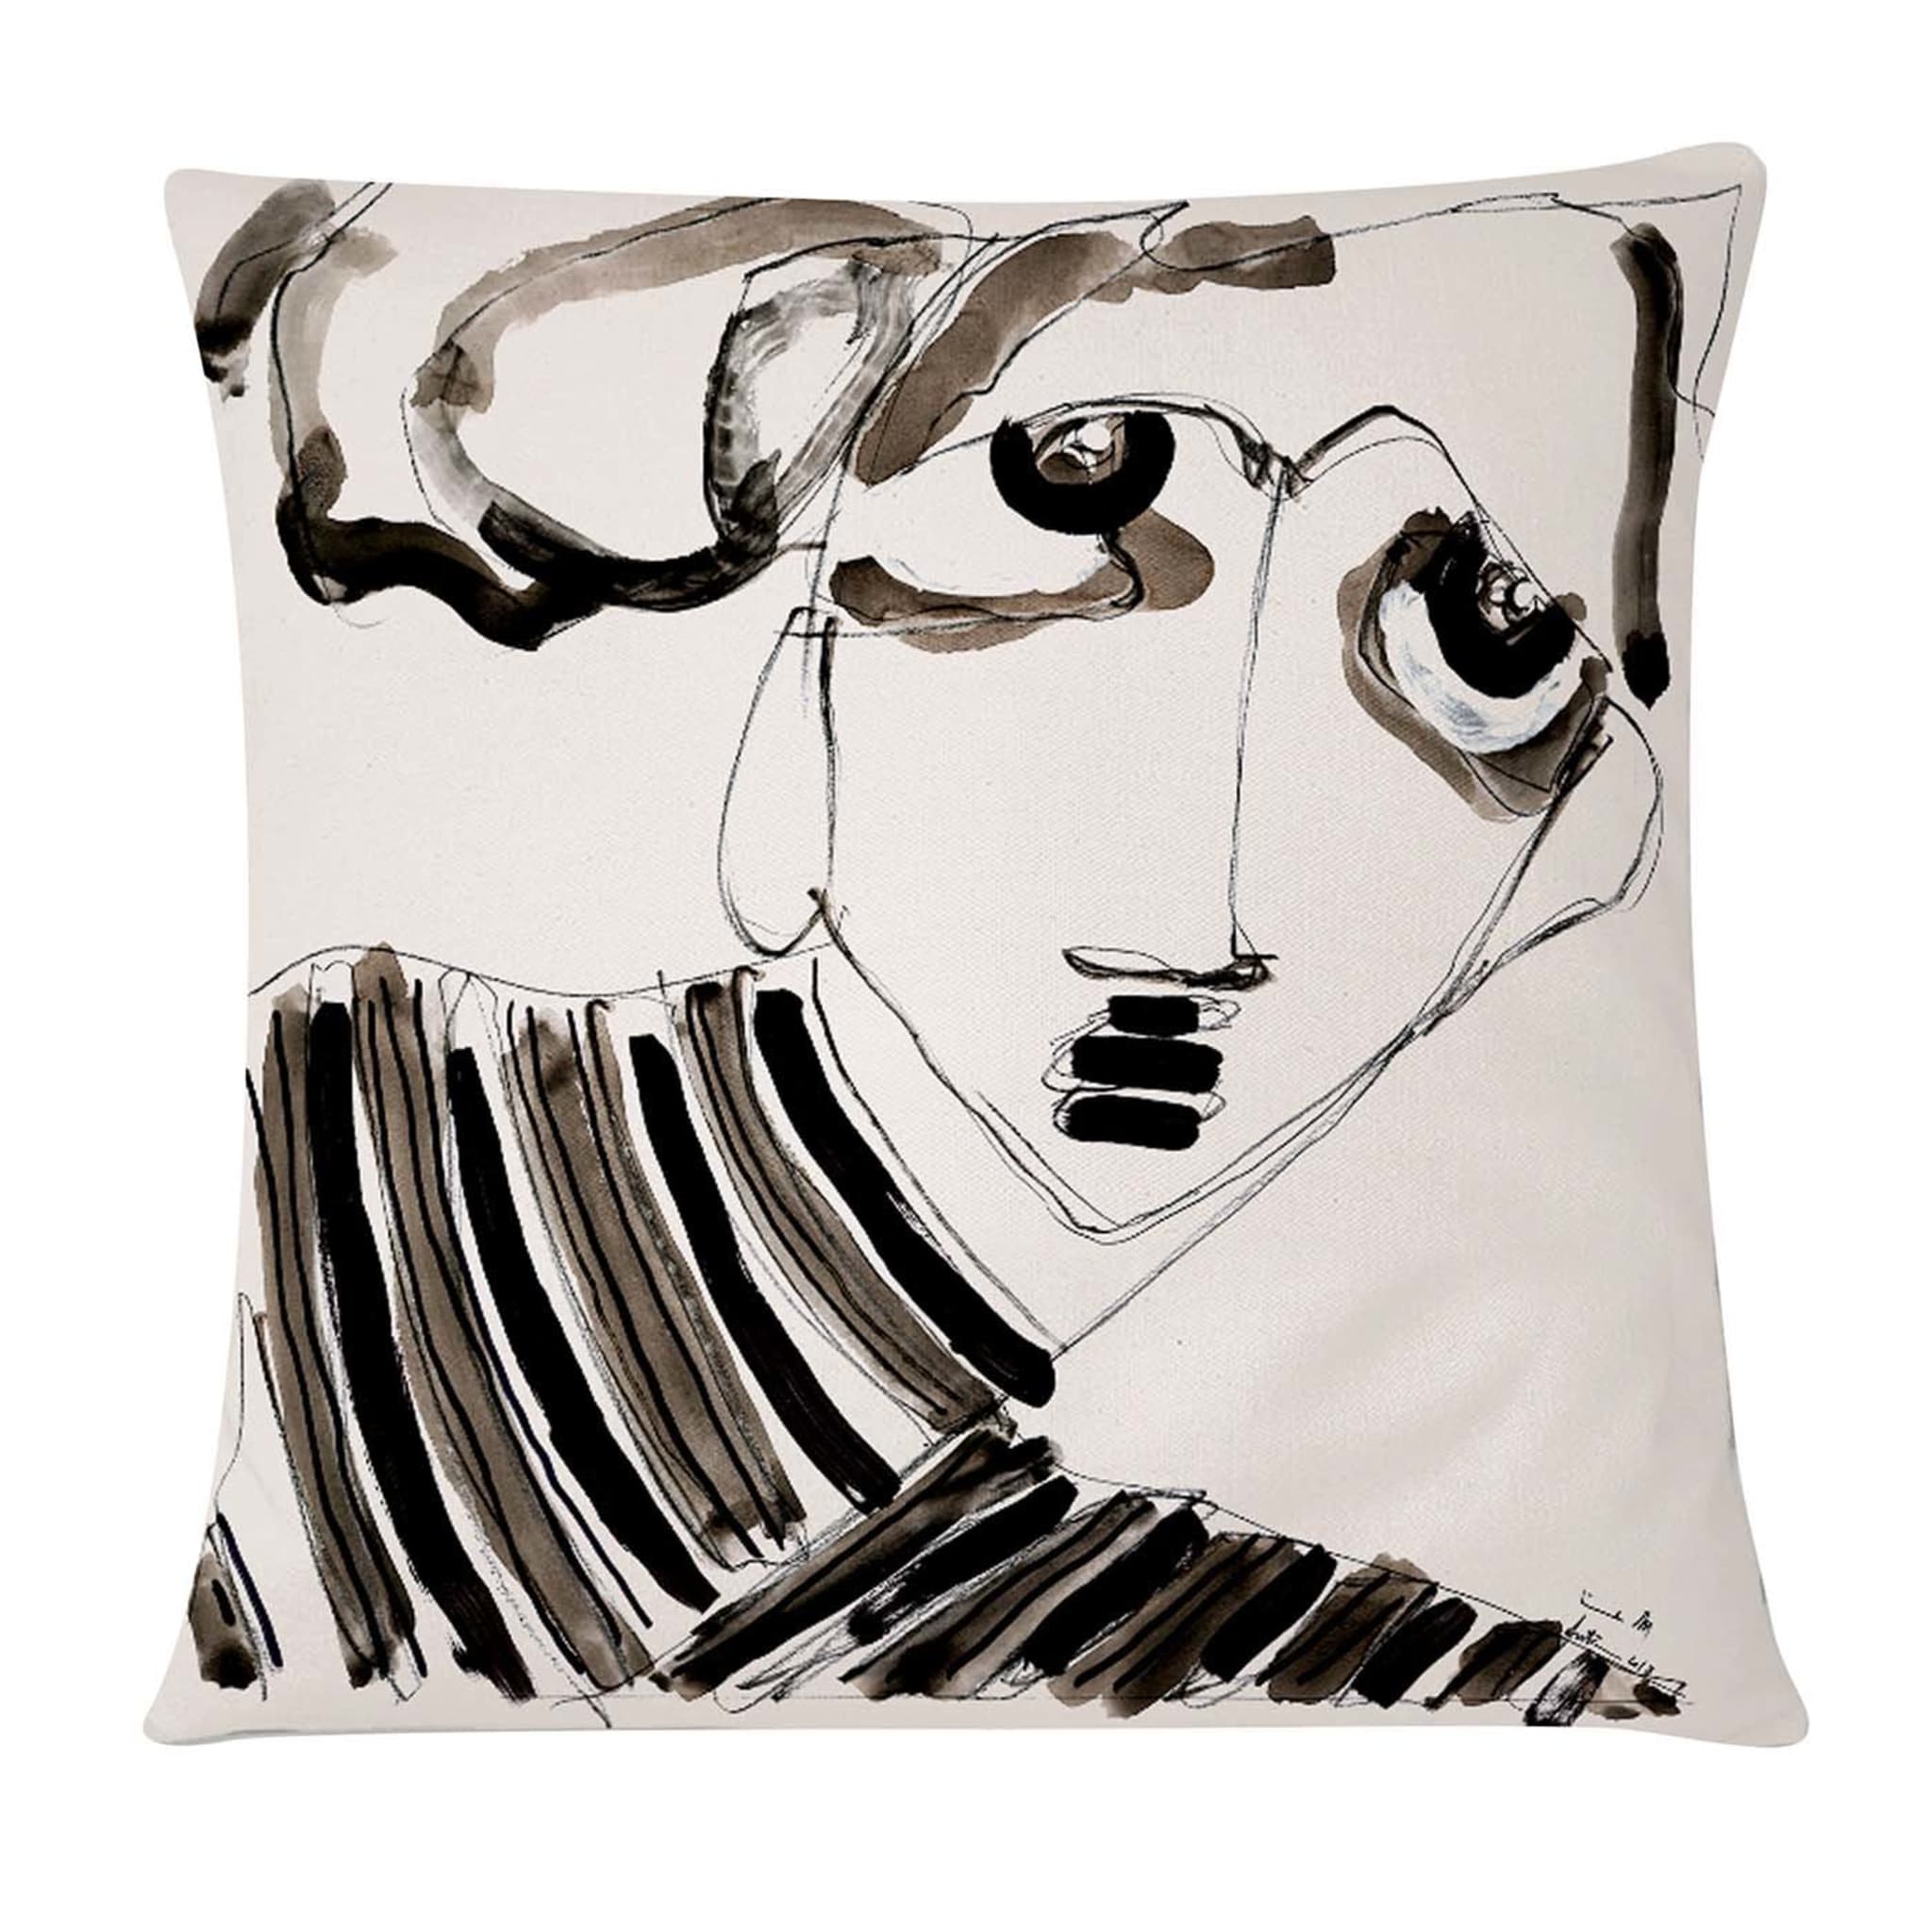 Amarcord II Cushion by Vincenzo D'Alba and Antonio Marras - Main view